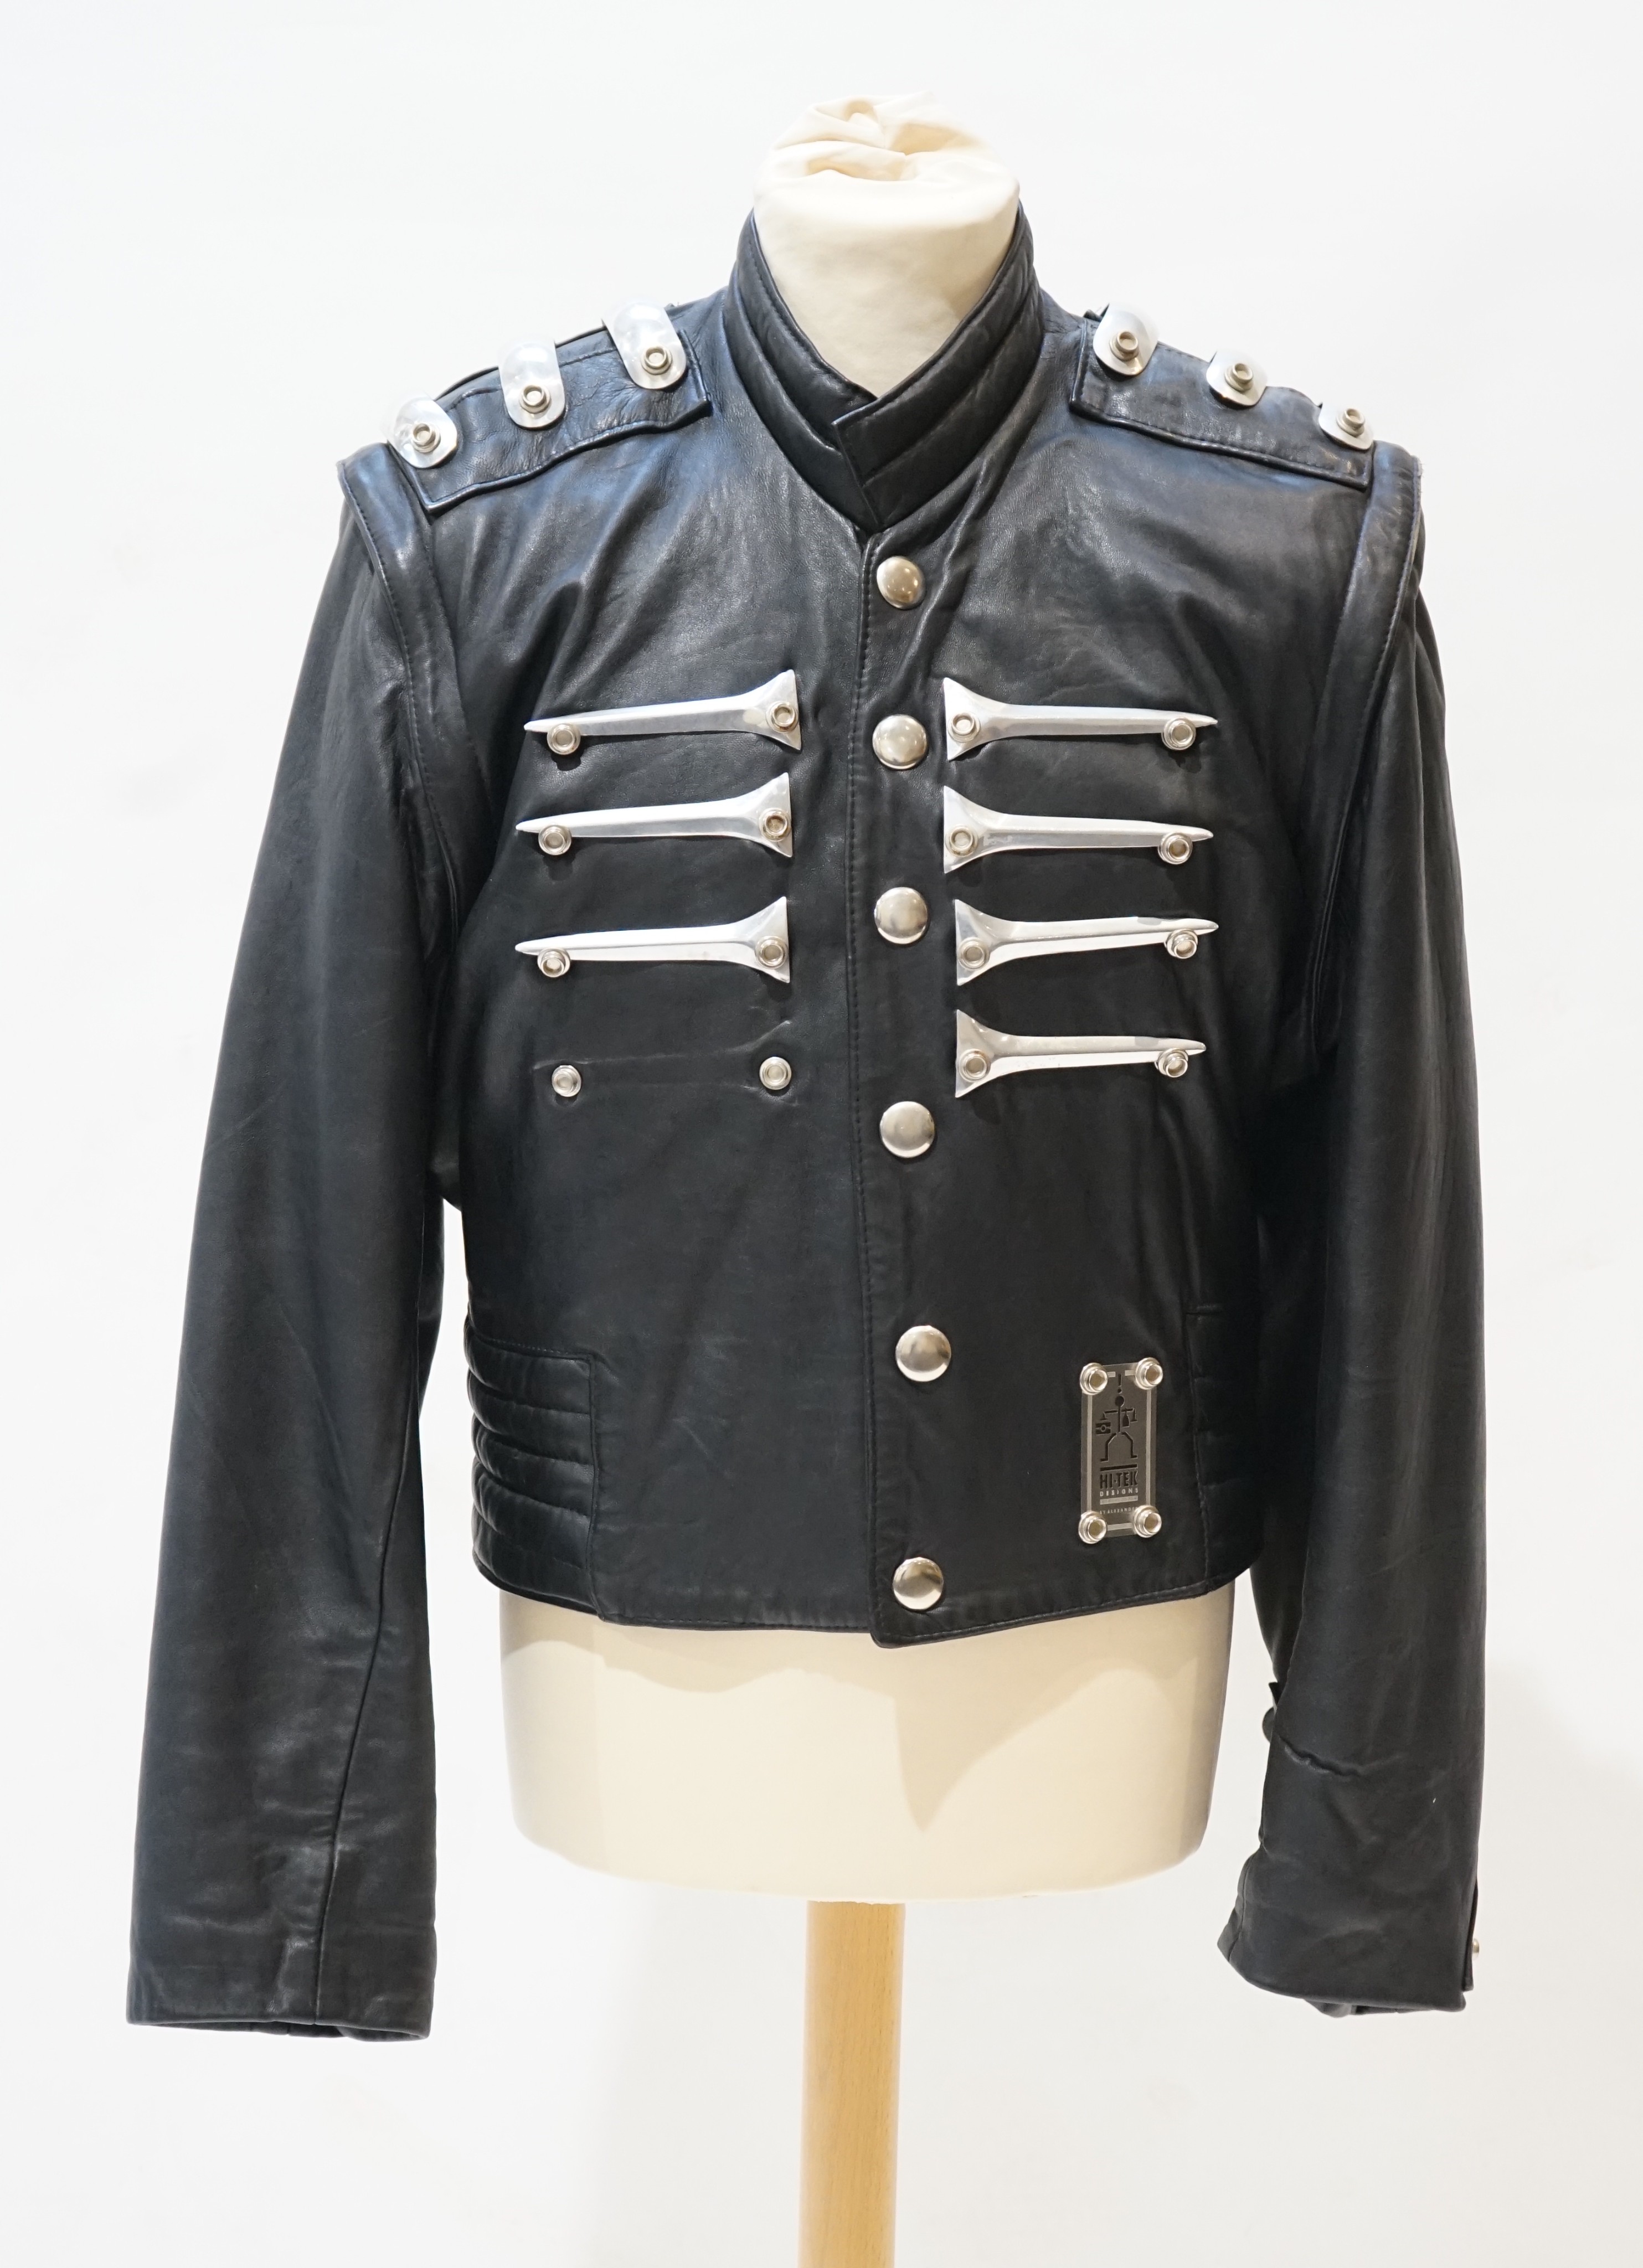 A gentleman's Alexander Hi-Tech padded leather bomber jacket with rivetted steel appliques and detachable arms, size medium